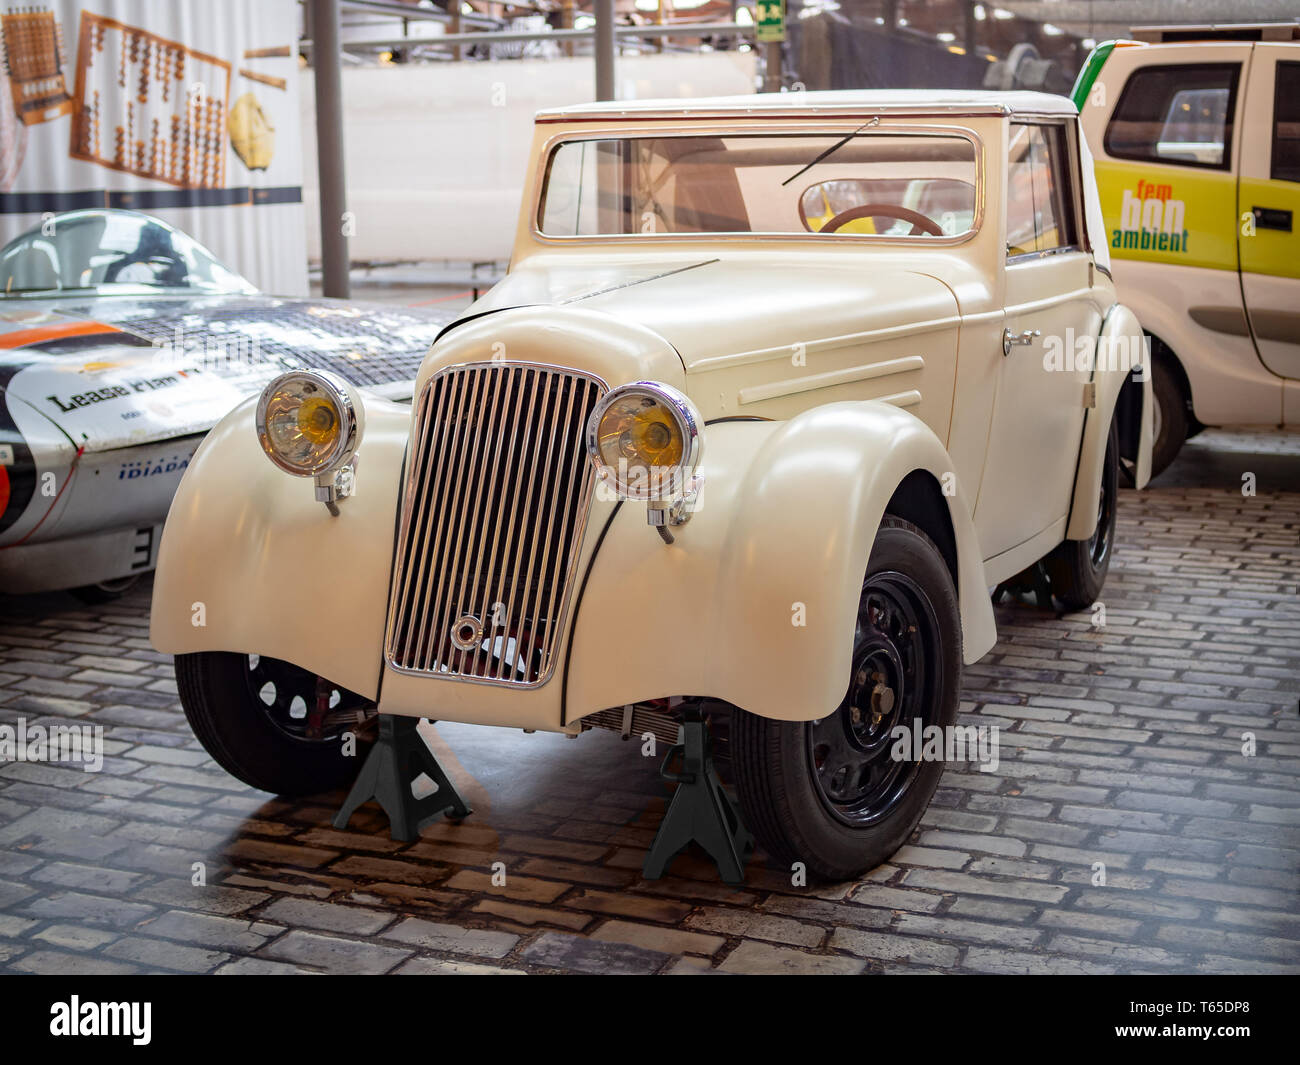 TERRASSA, SPAIN-MARCH 19, 2019: 1943 Aymerich Fabrica de Automoviles (AFA) automobile in the National Museum of Science and Technology of Catalonia Stock Photo